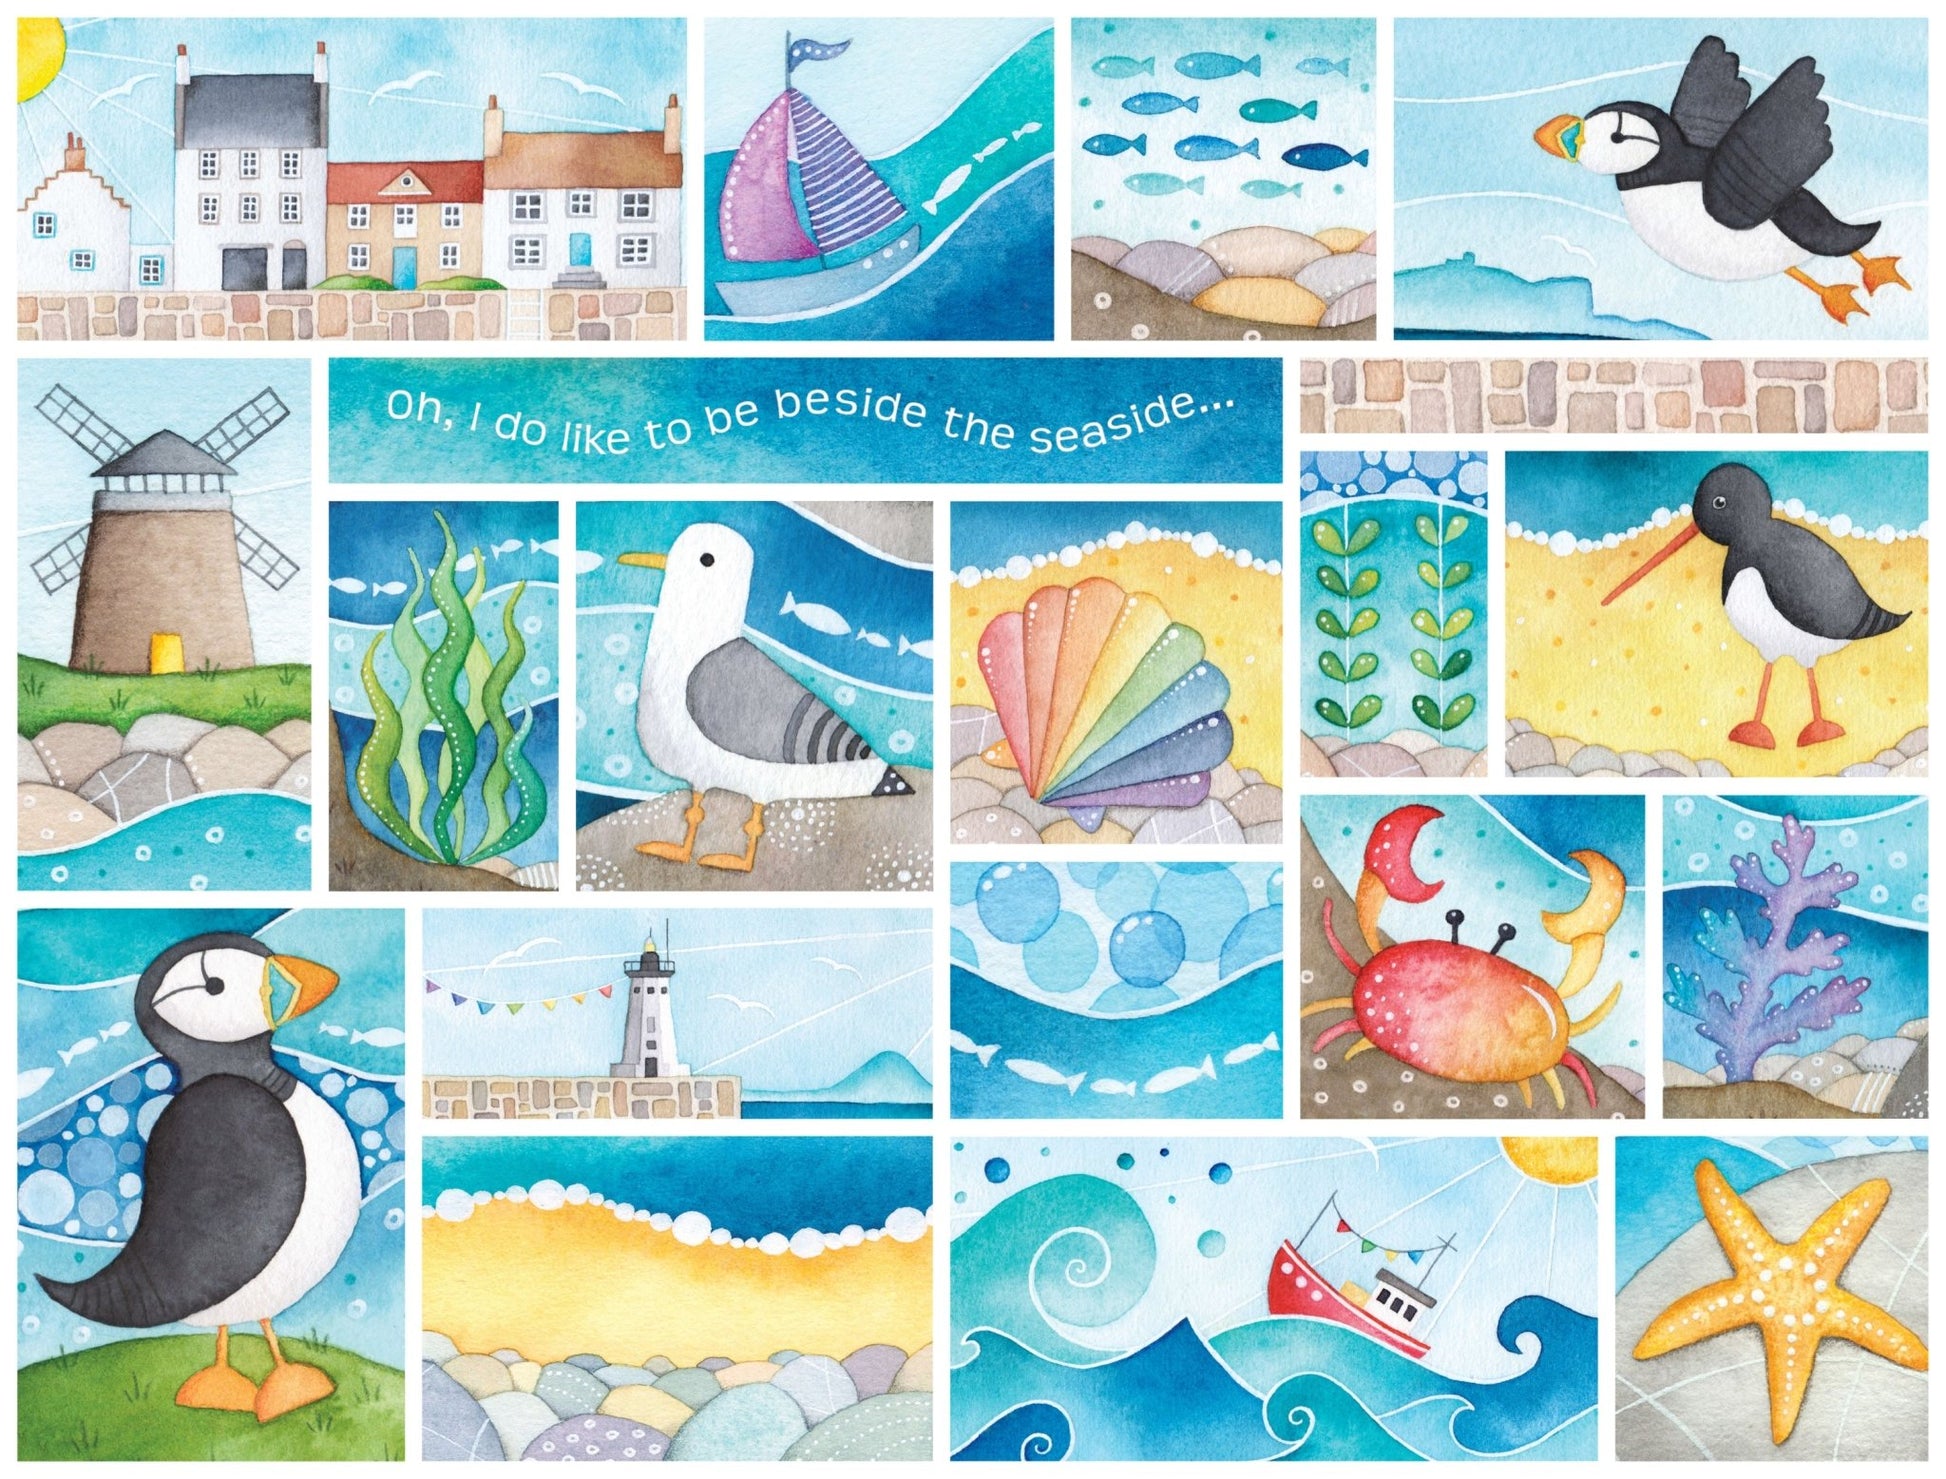 Jigsaw Puzzle - A Day at the Seaside - 1000 pieces - Puffins, Seagull, Crab, Boats - East Neuk Beach Crafts